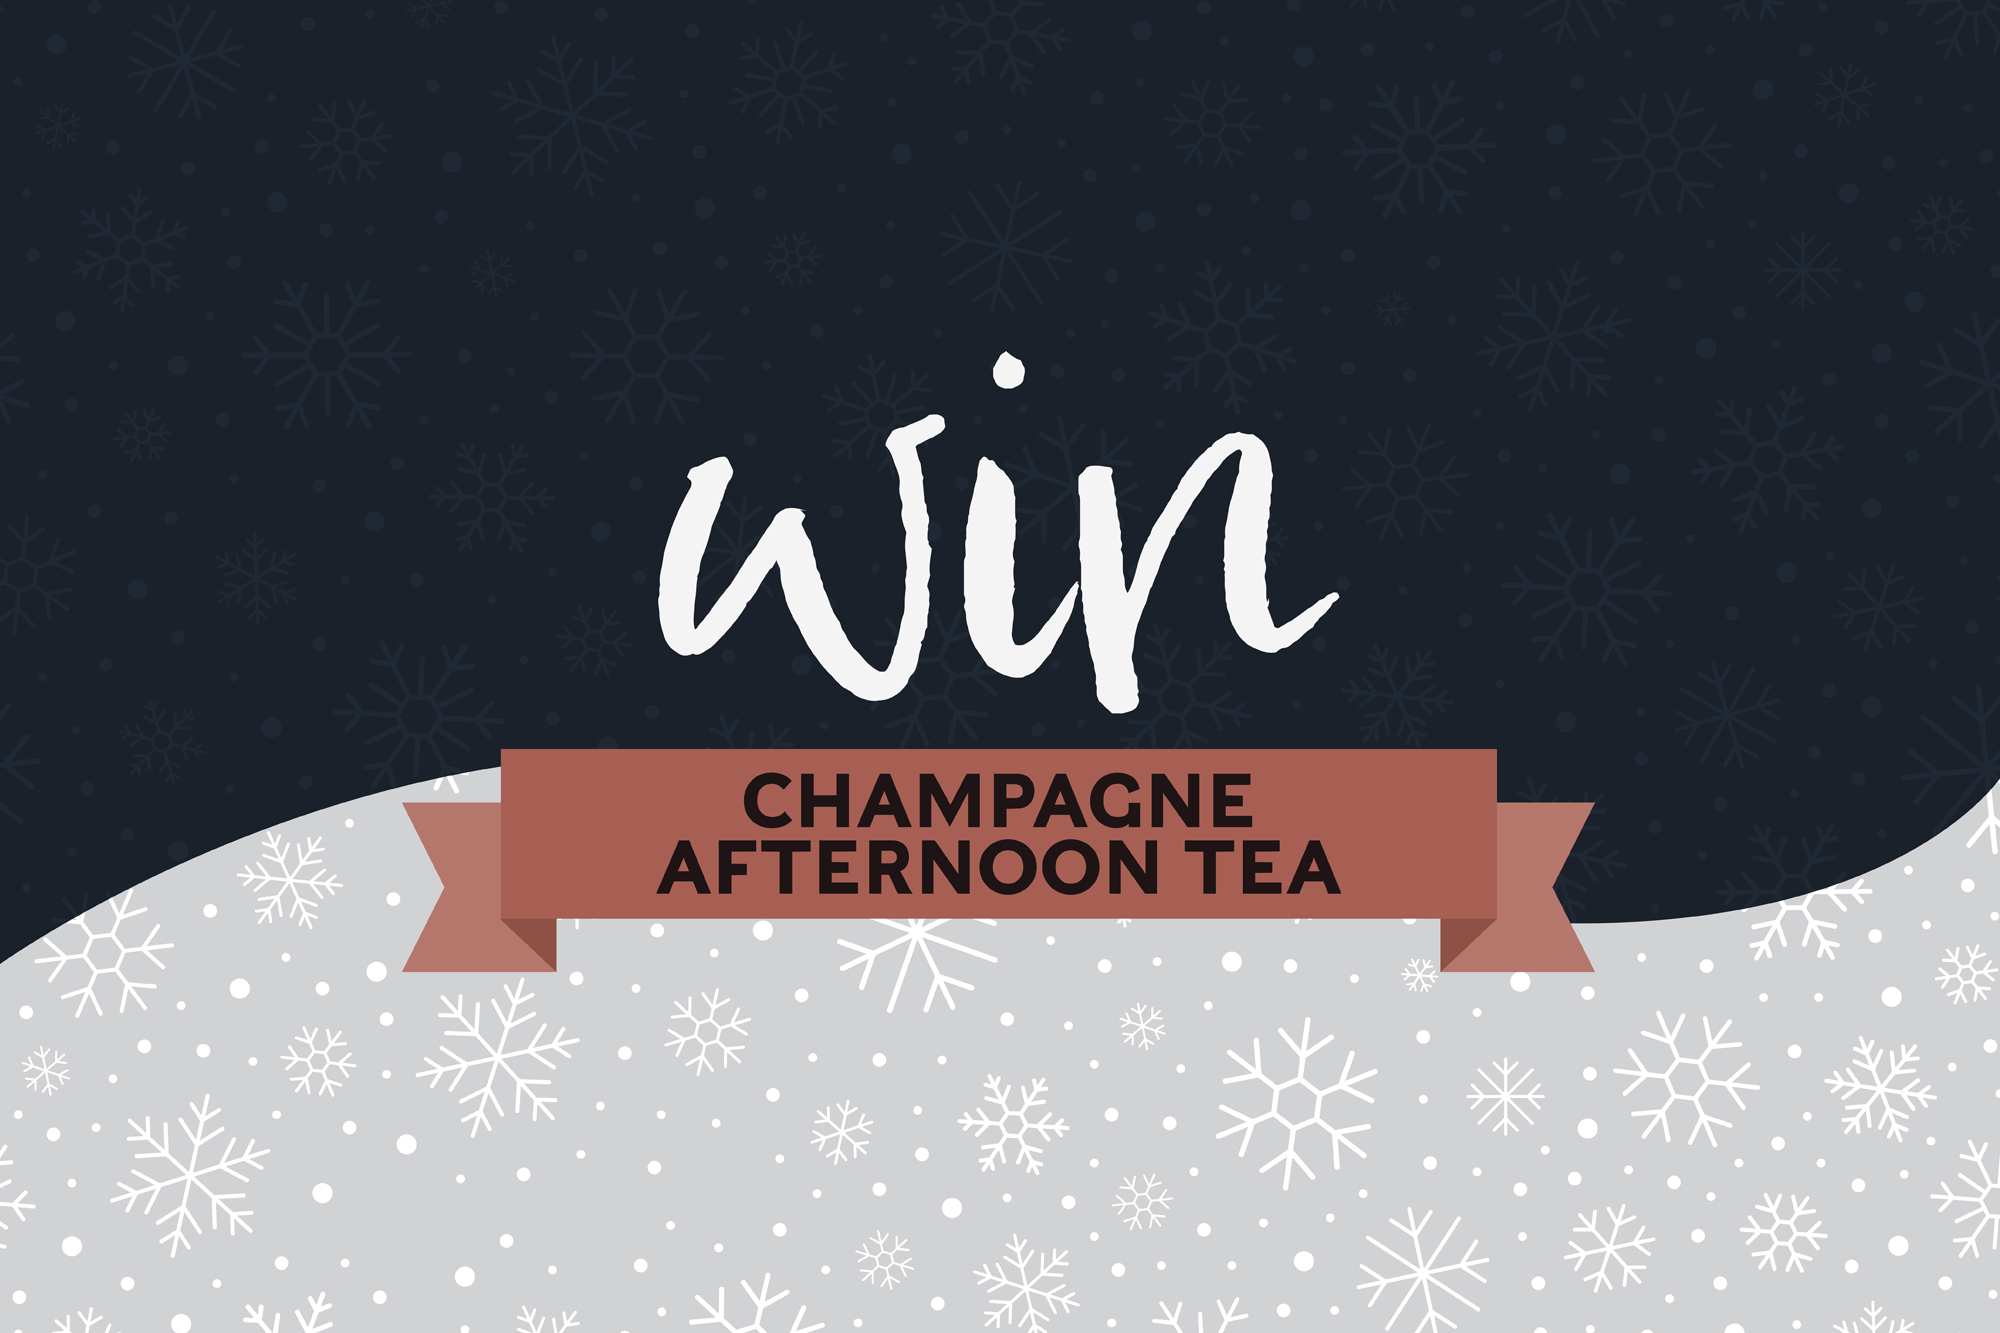 Win Champagne afternoon tea The Castle Hotel